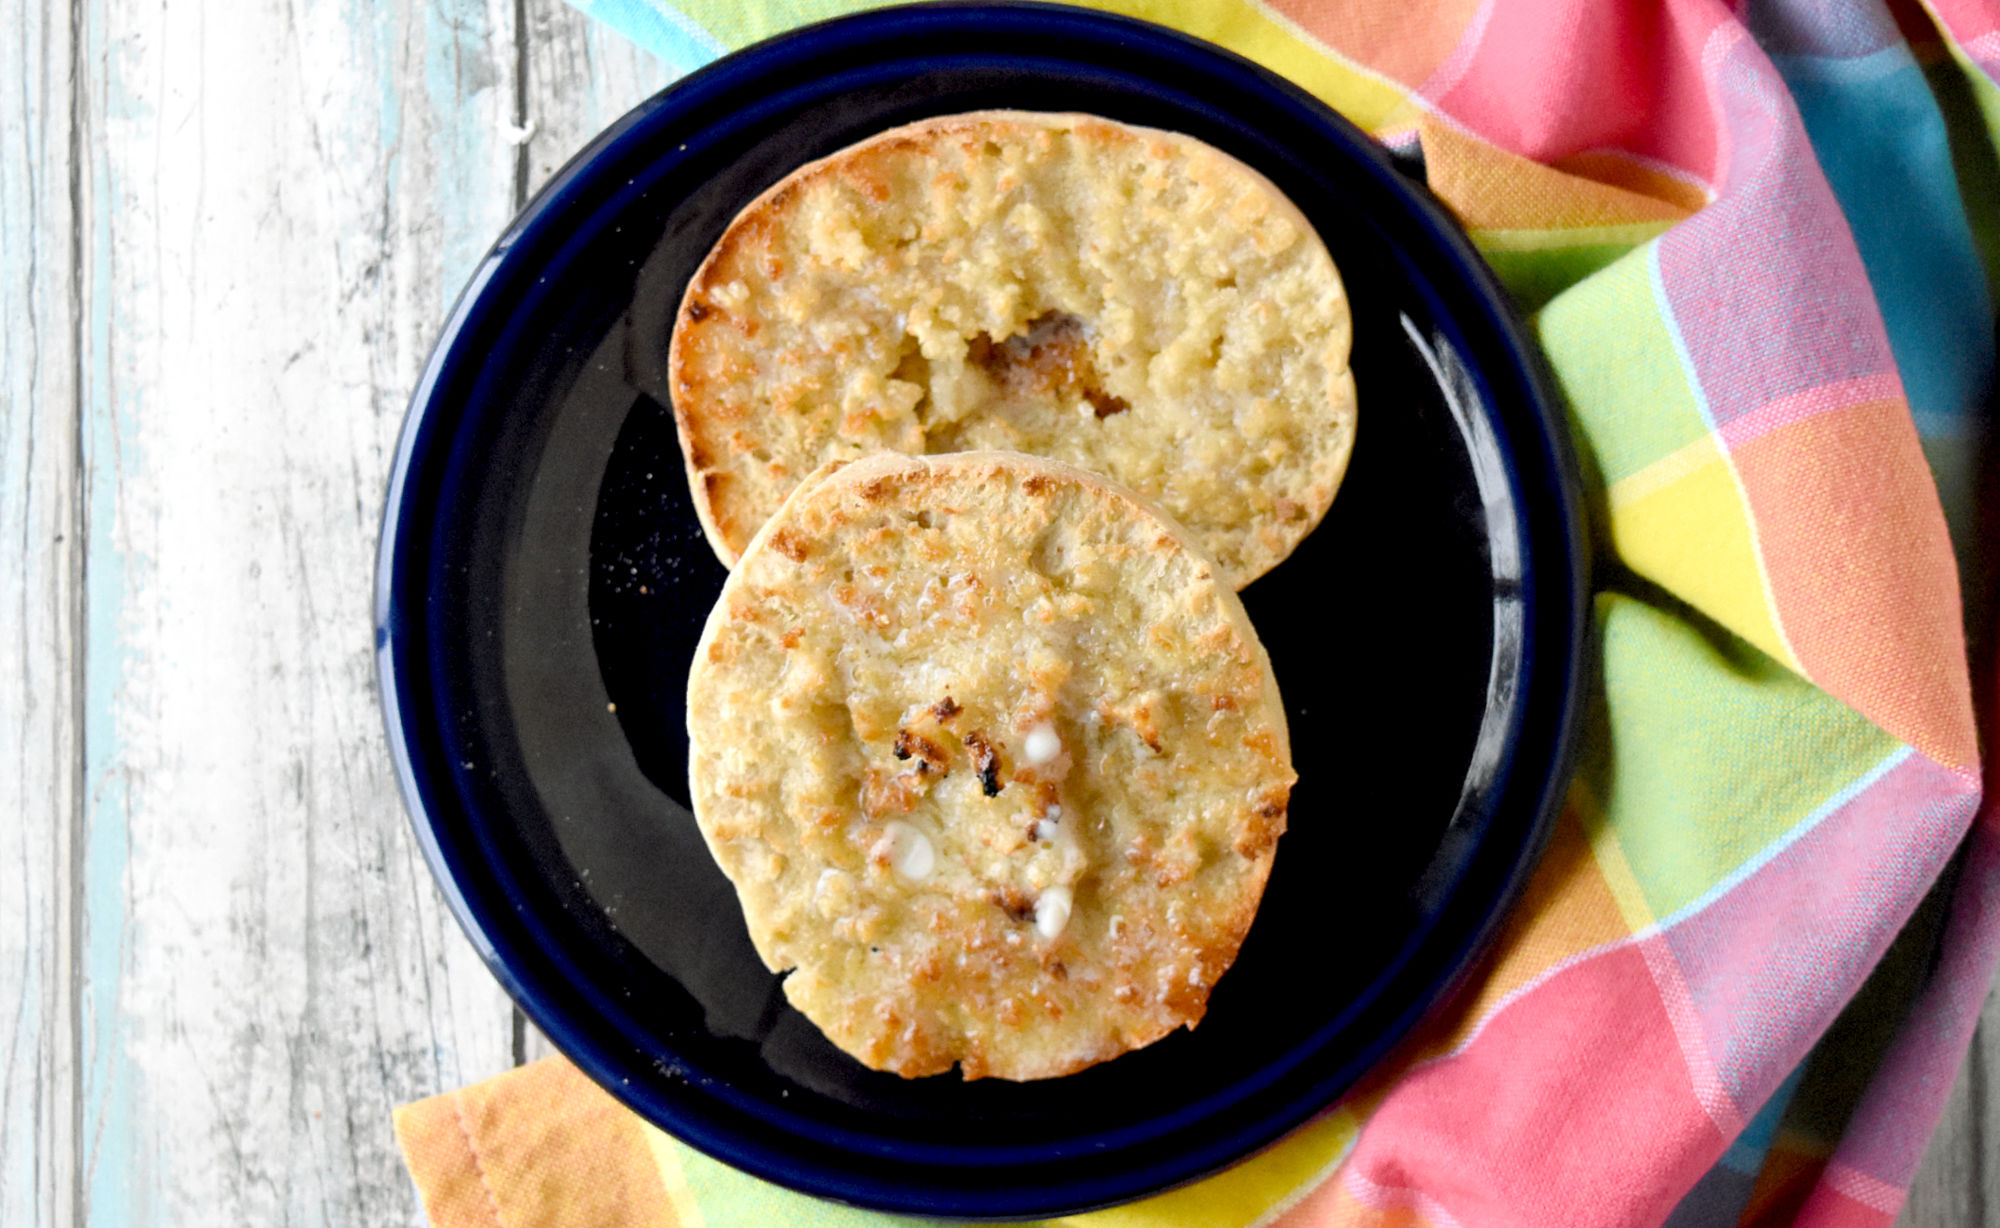 Sourdough English Muffins are easy to make and are a delicious change from your typical breakfast bread. They make the best muffin sandwiches, too! #BrunchWeek #sourdough #sourdoughstarter #discaredrecipe #breadrecipe #Englishmuffins
